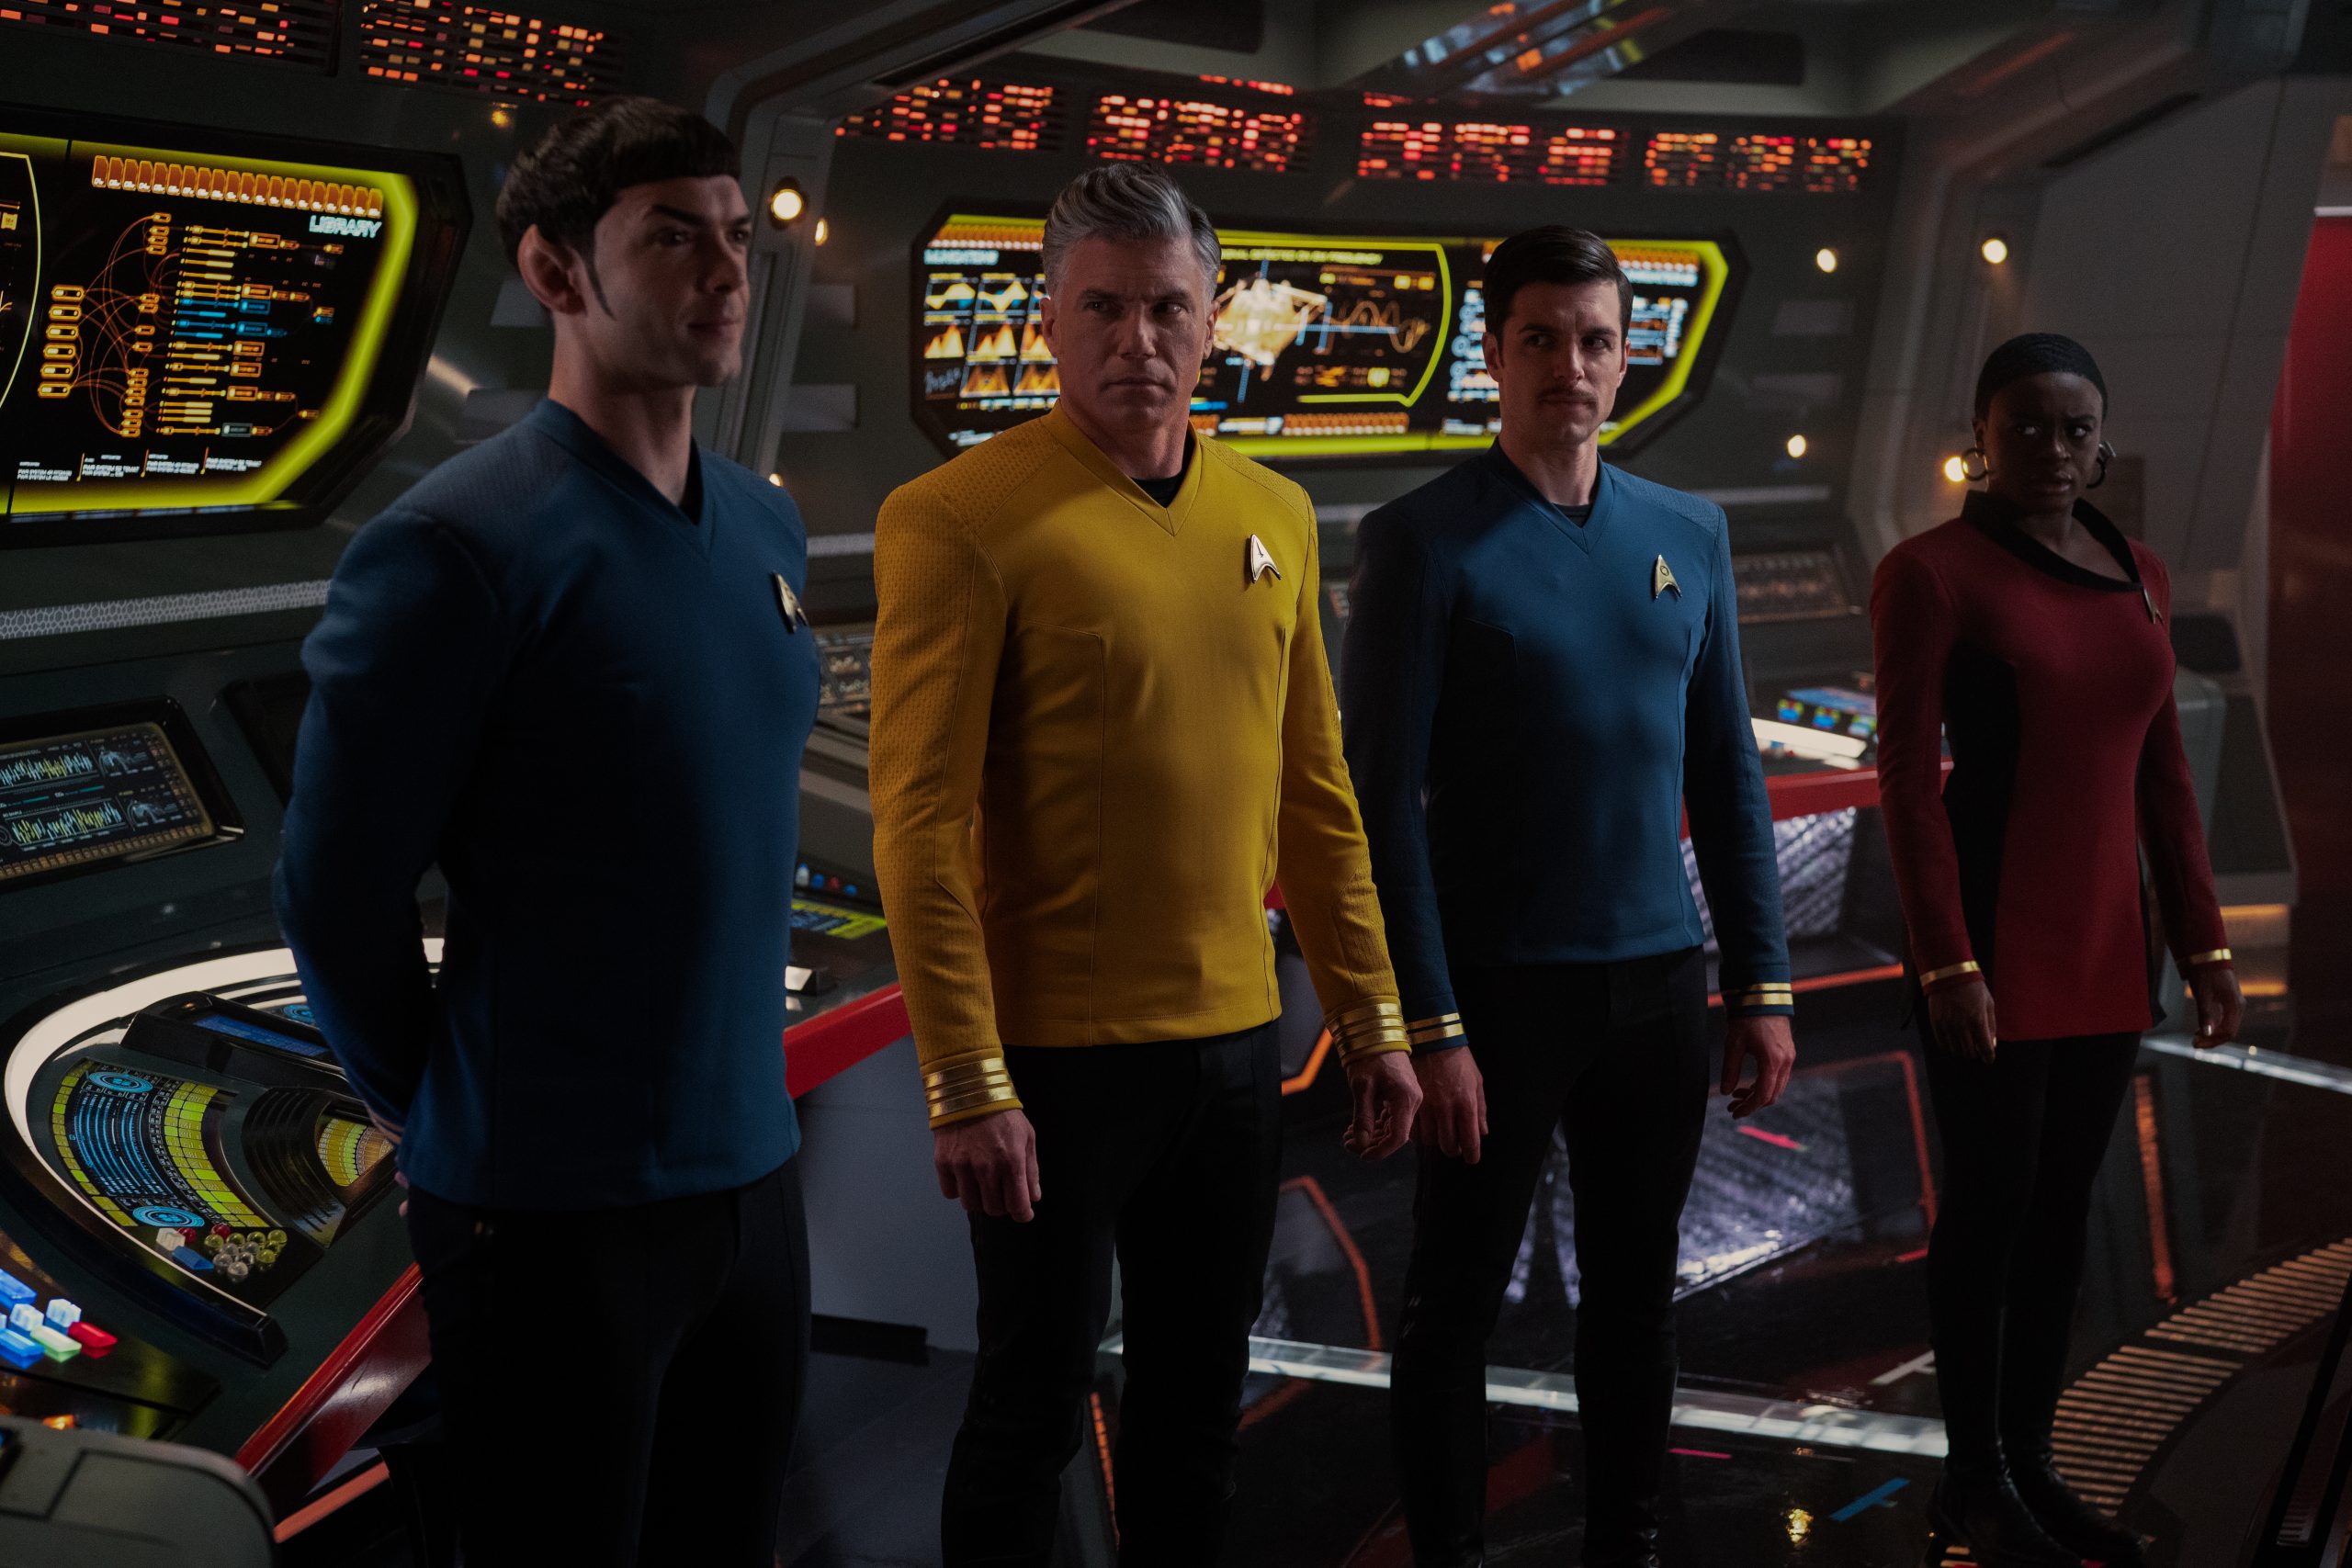 Ethan Peck as Spock, Anson Mount as Pike, Dan Jeannotte as Samuel Kirk, and Celia Rose Gooding as Uhura